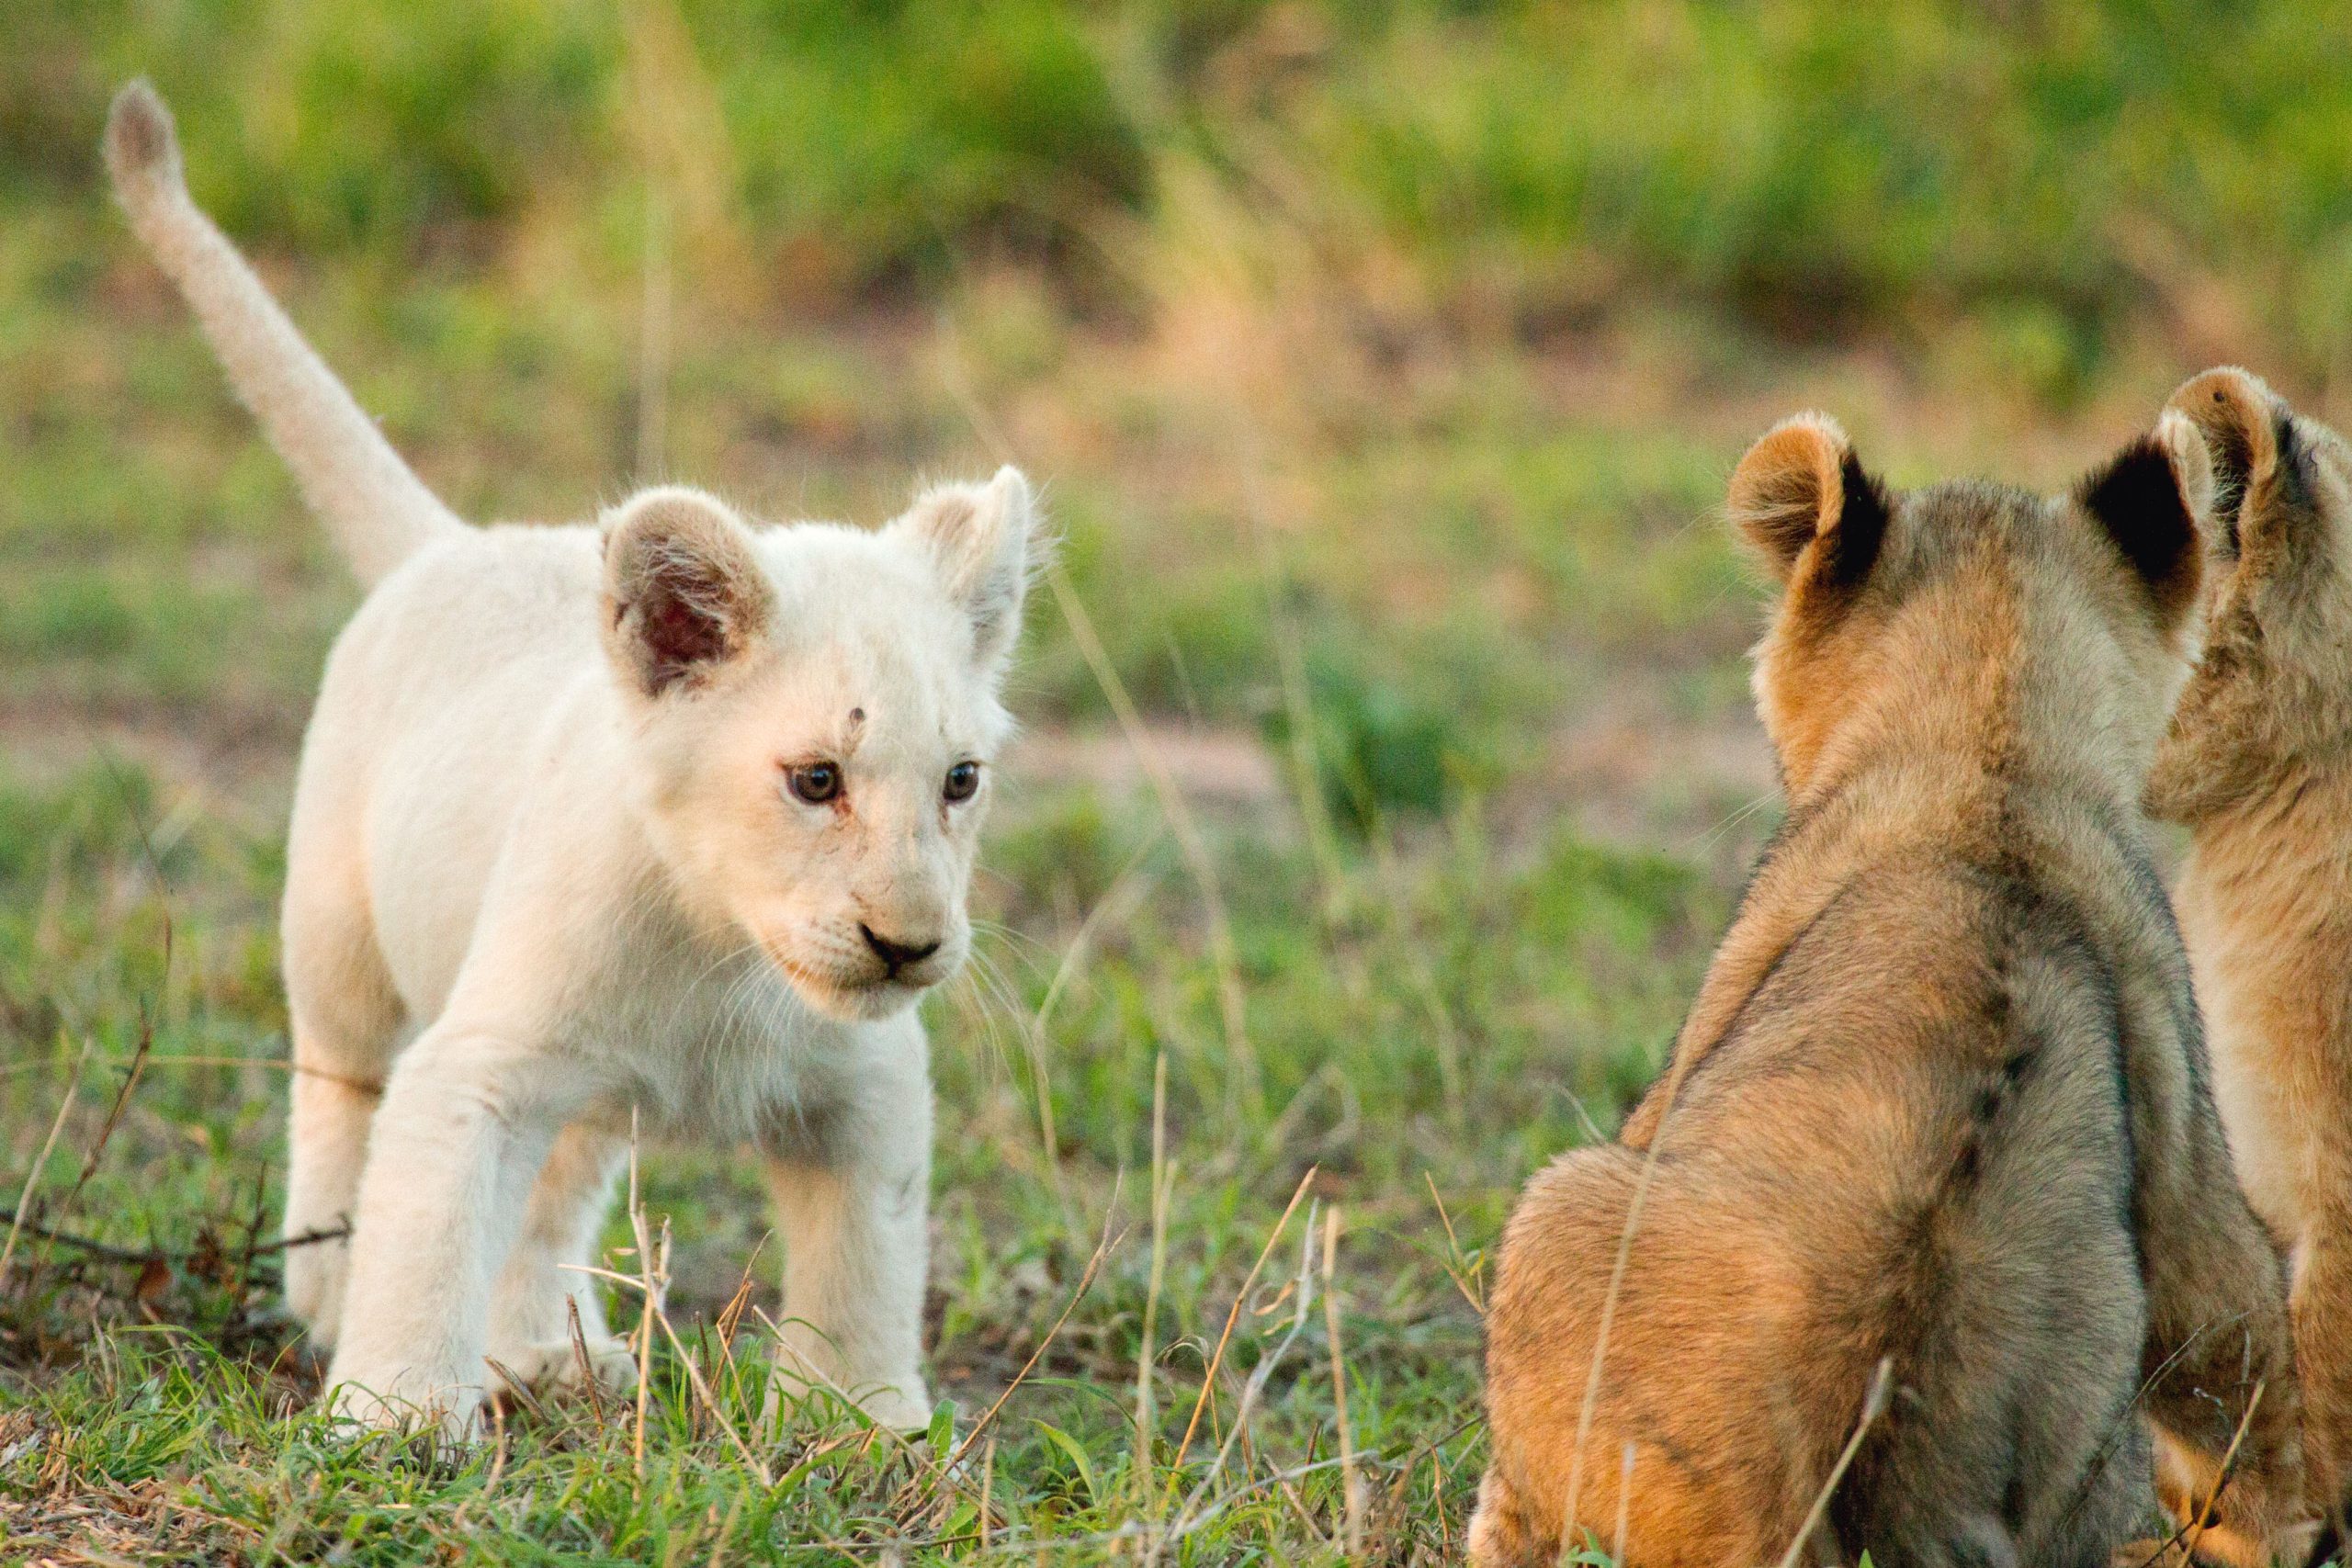 The white lions in Kruger National Park, South Africa